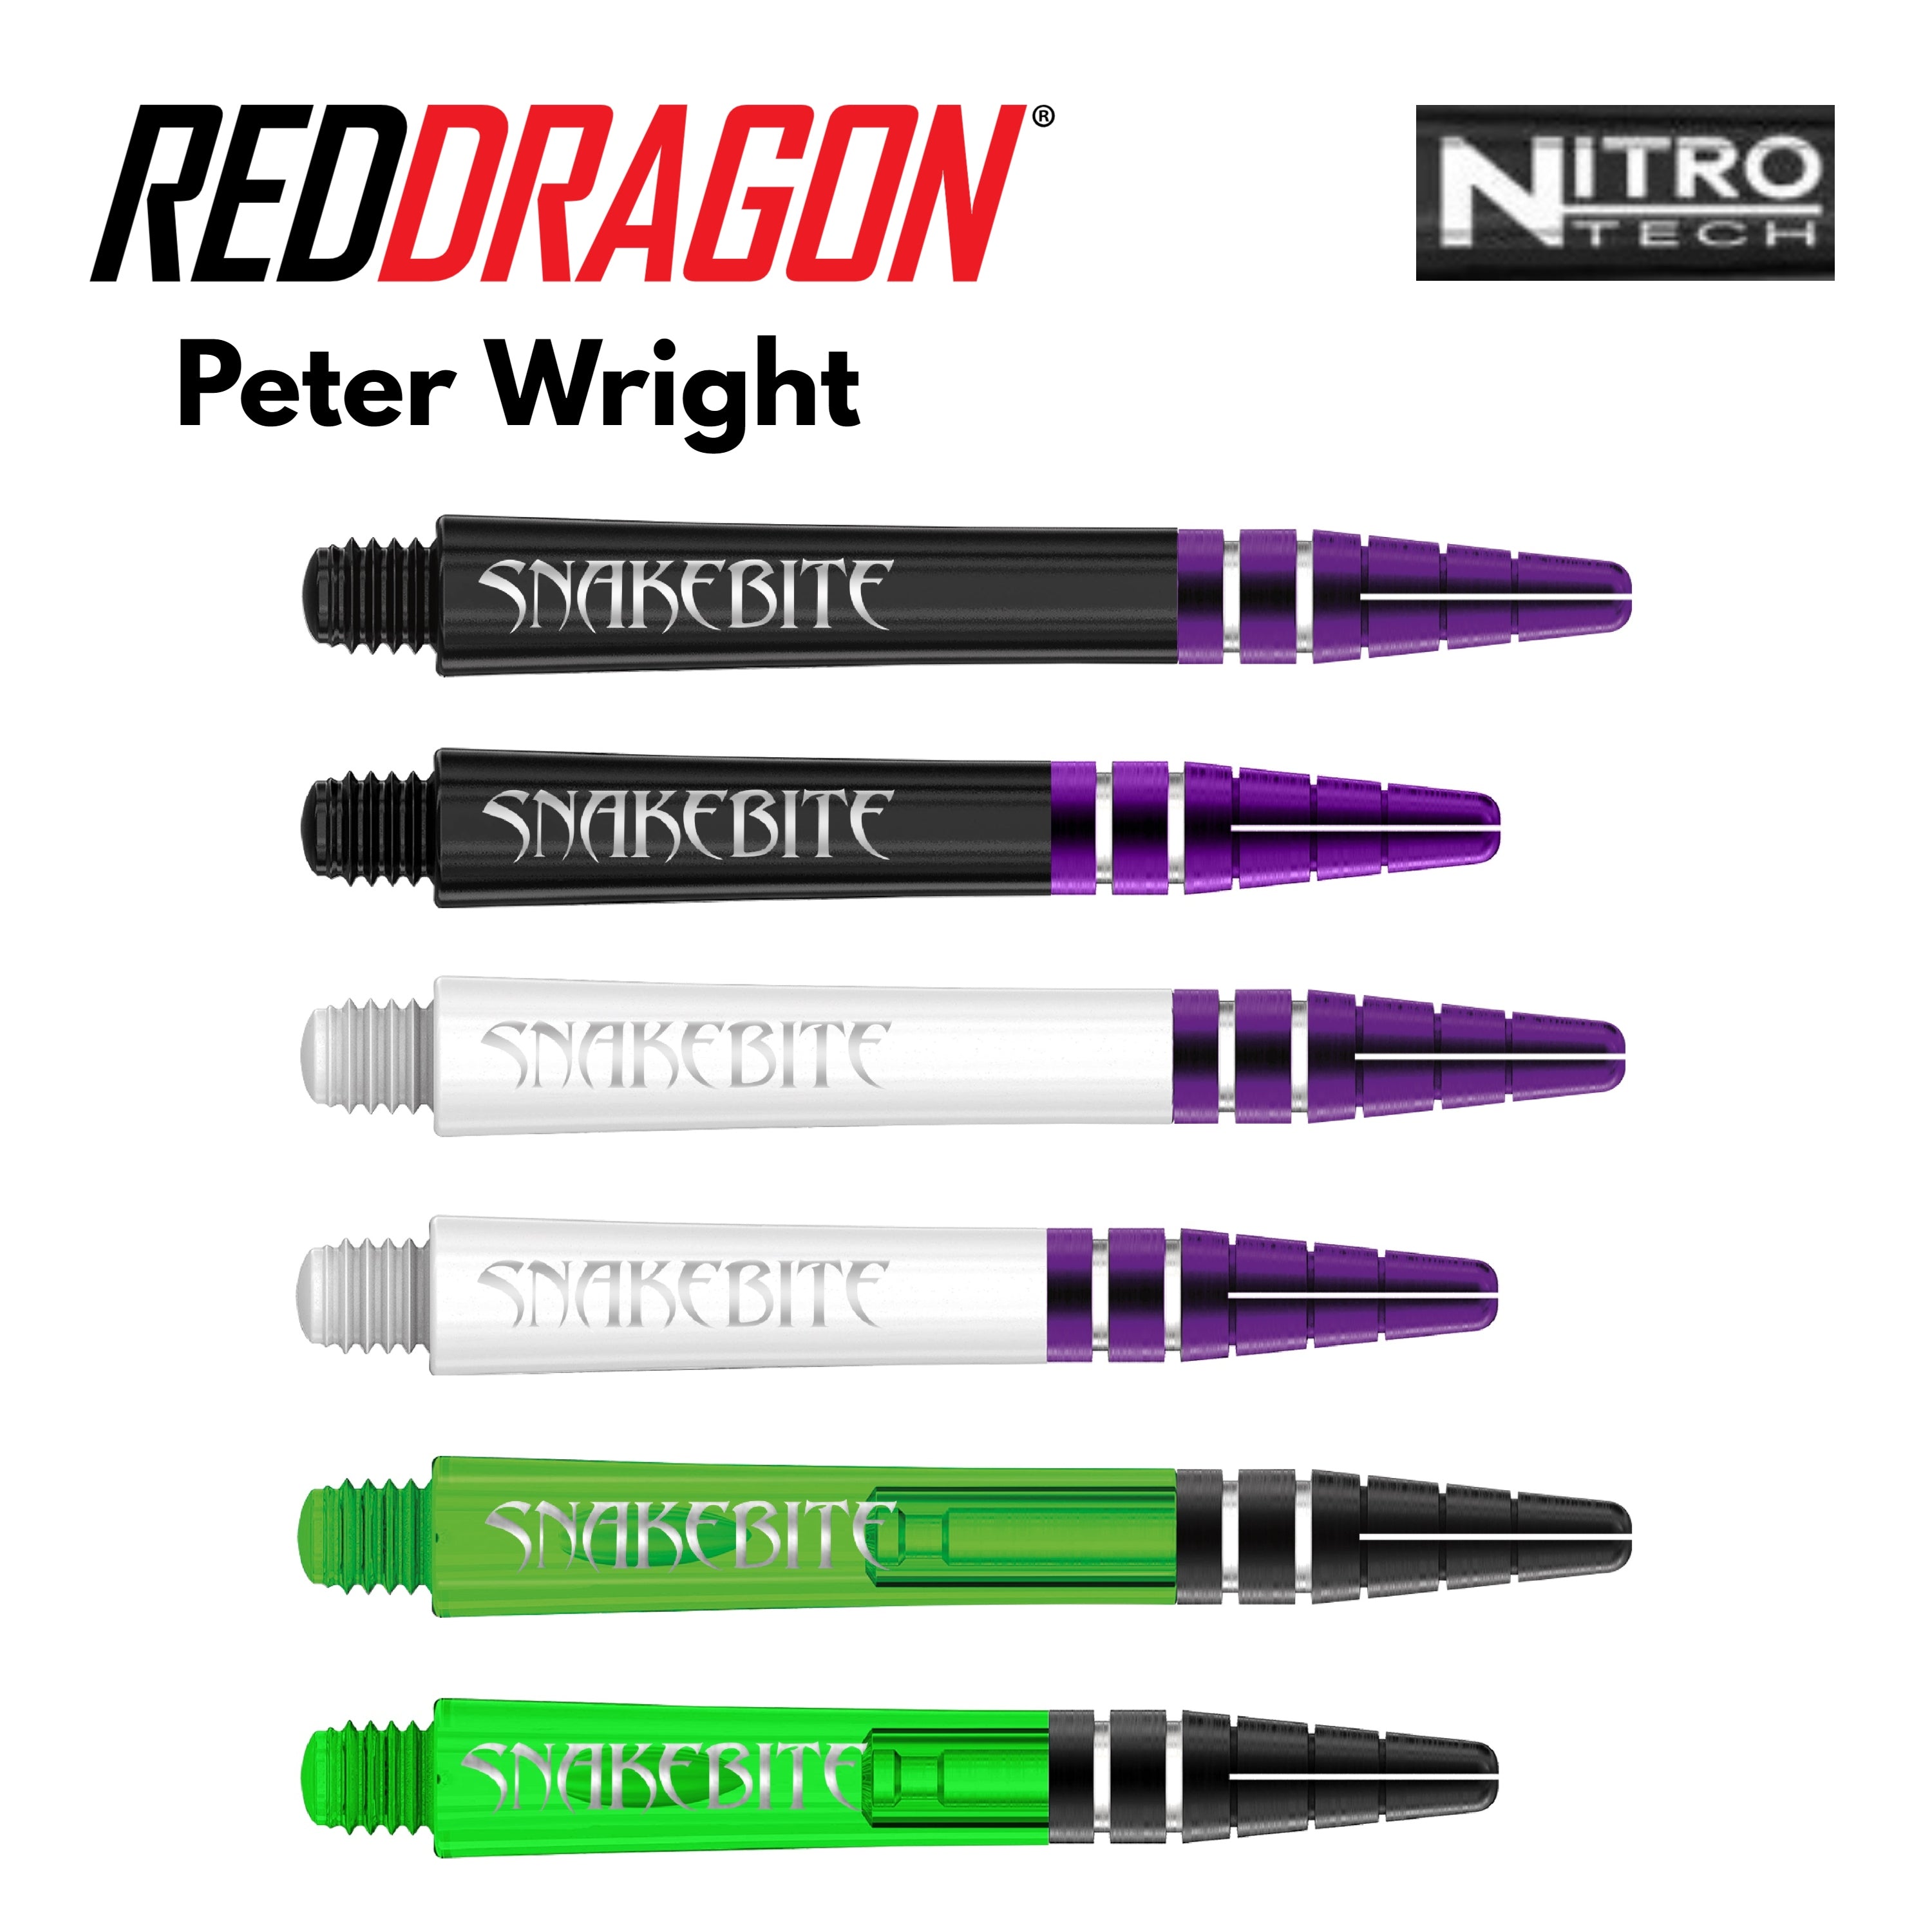 Wały Red Dragon Nitrotech Peter Wright Snakebite 